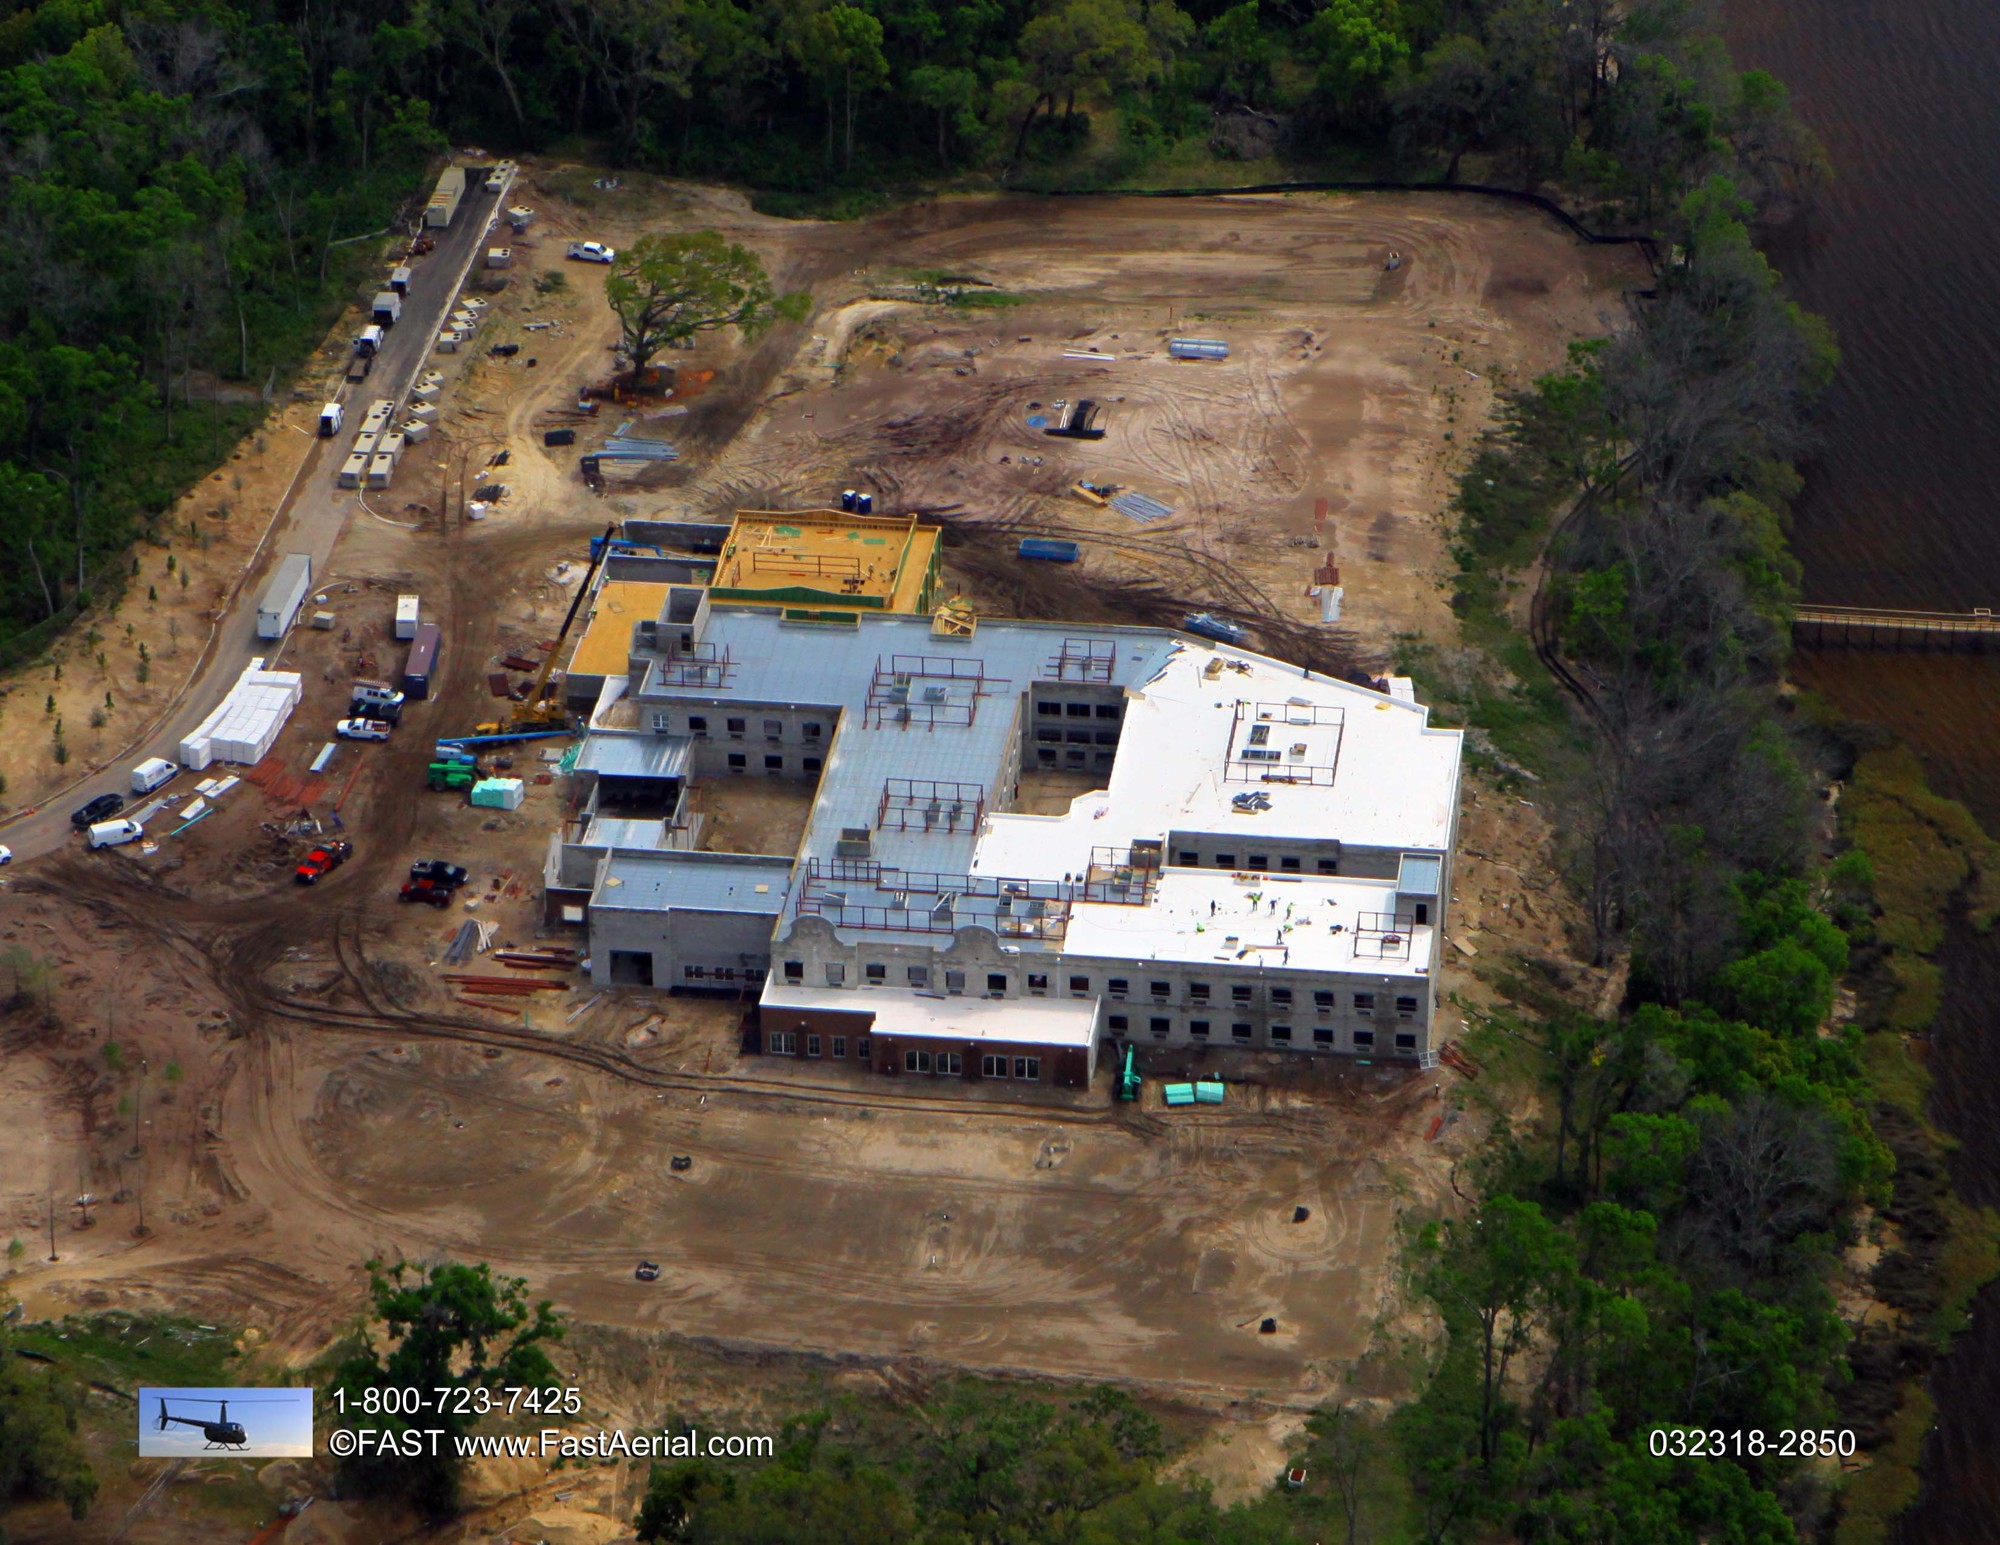 A March 23 aerial photograph of the 120-room Dolphin Pointe Health Care skilled nursing center under construction north of Jacksonville University.